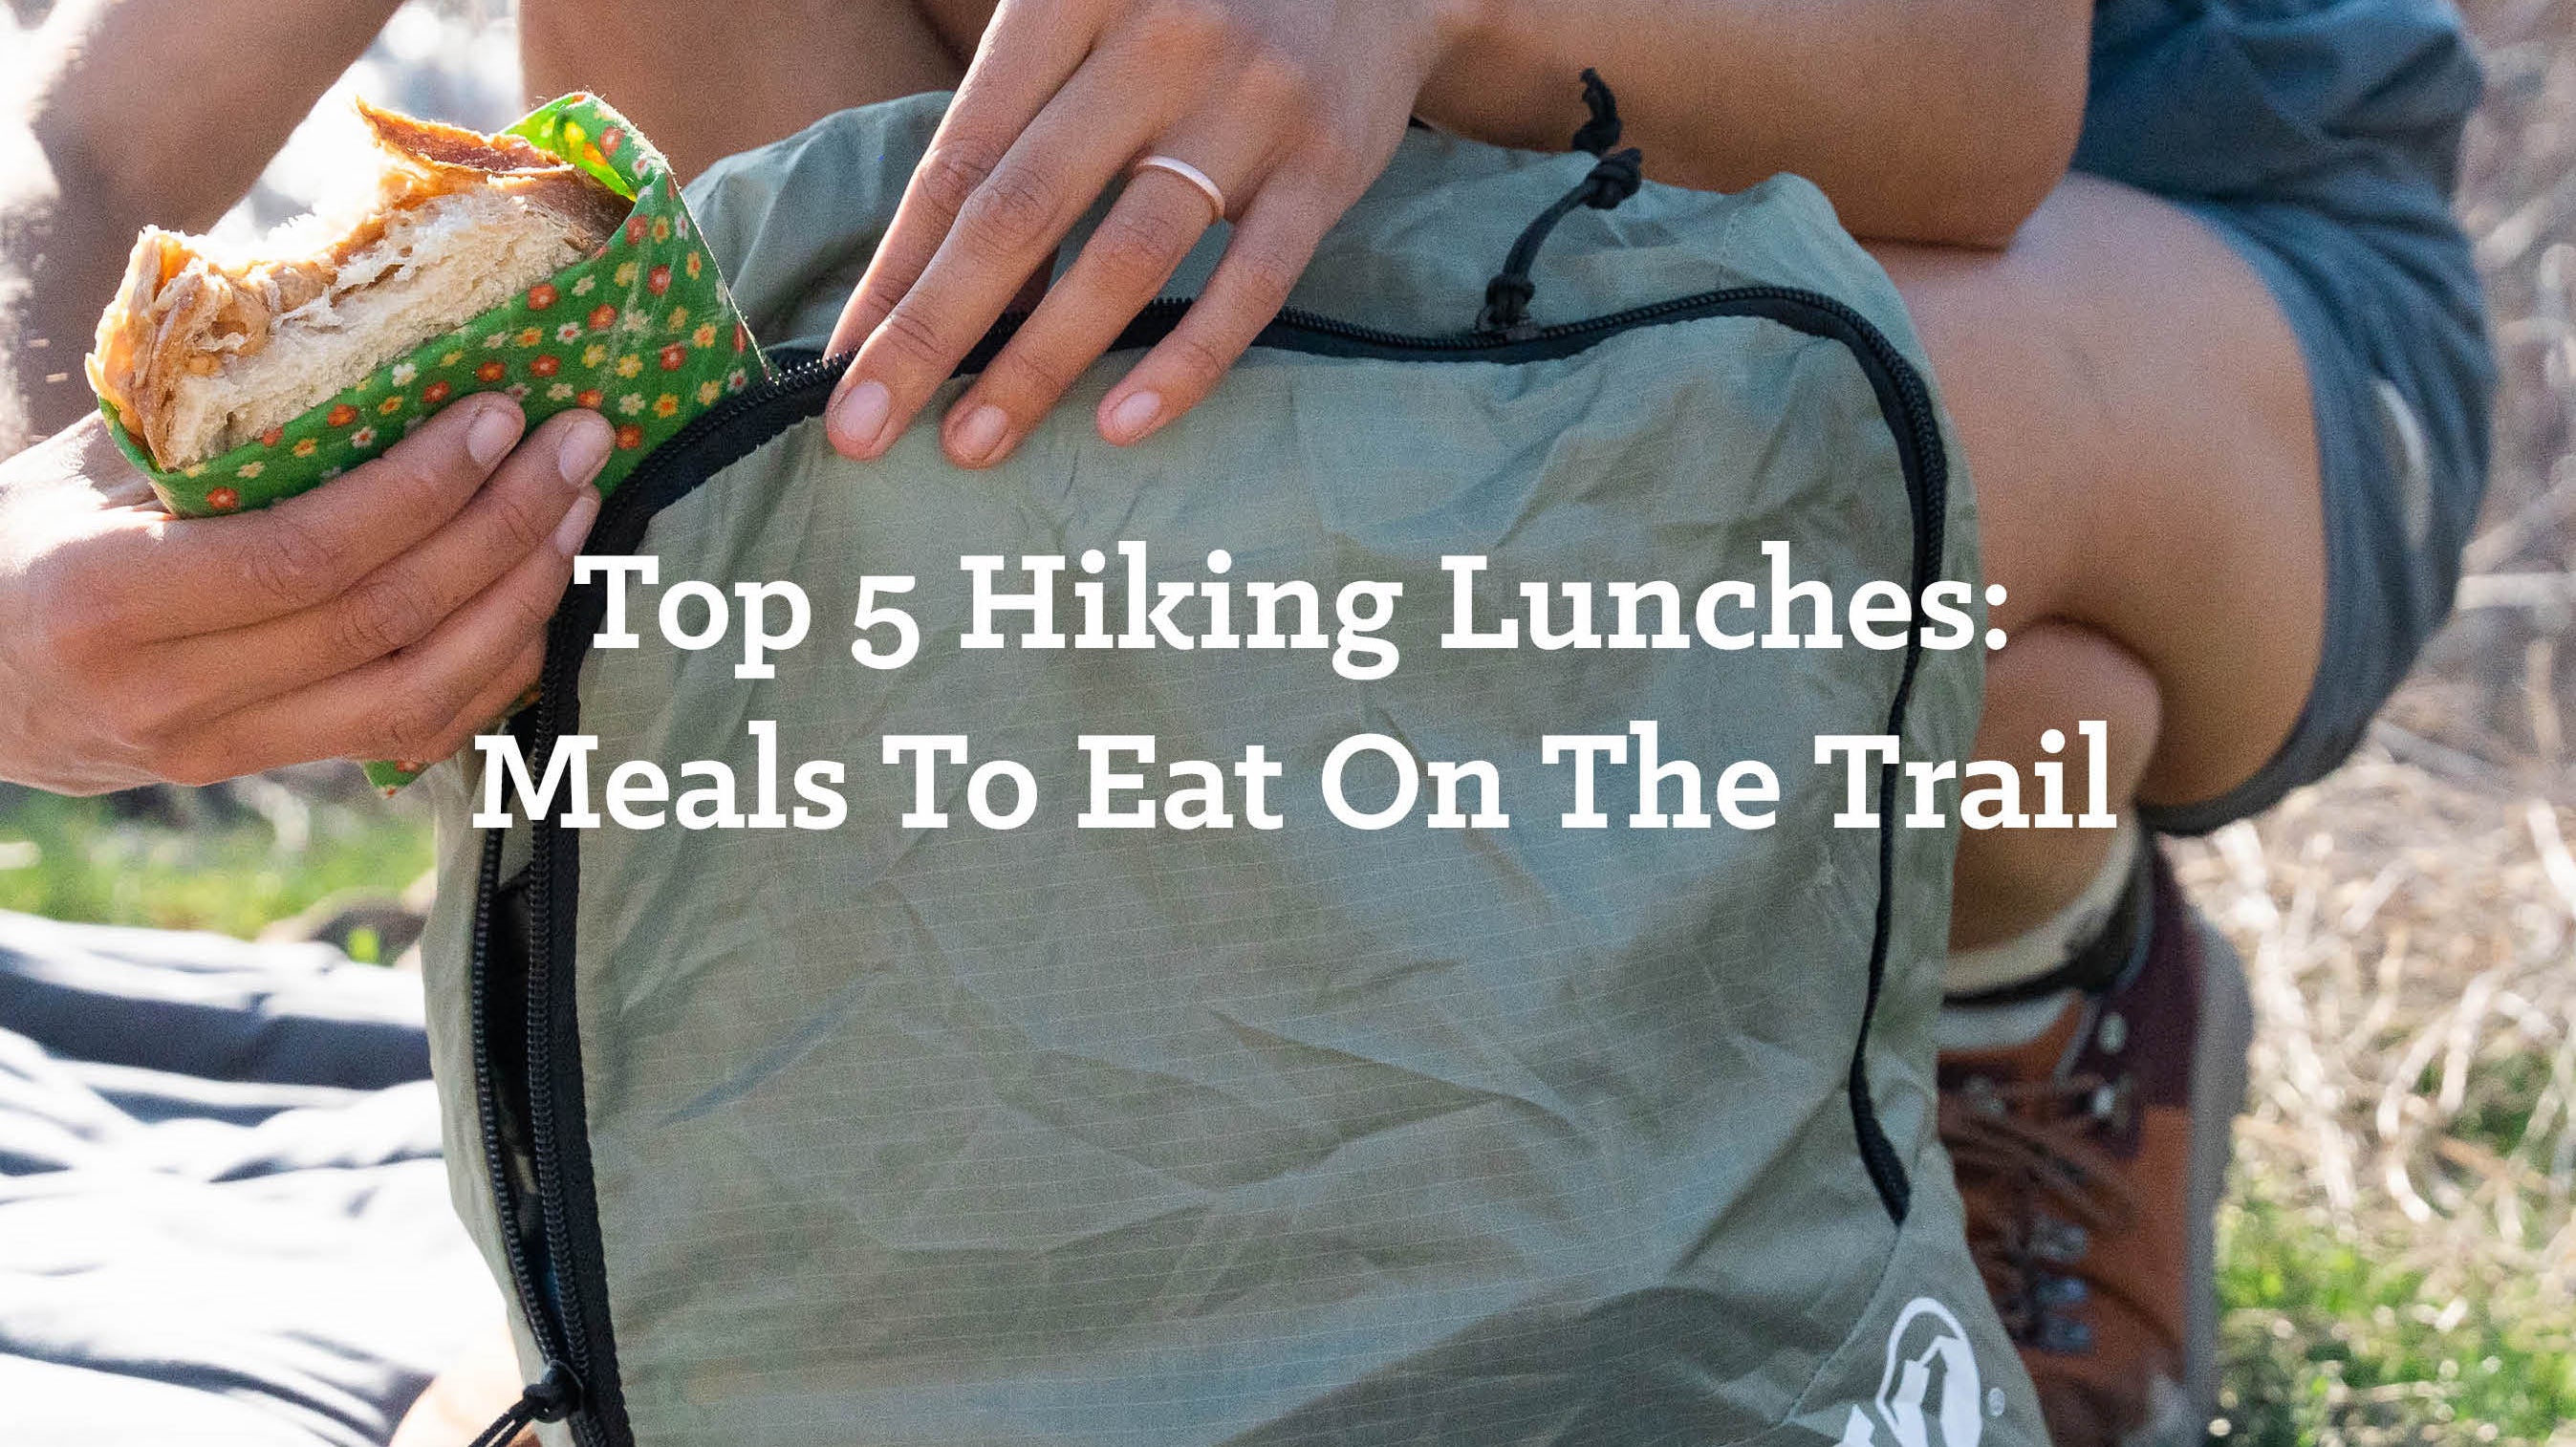 Top 5 Hiking Lunches: Meals To Eat On The Trail